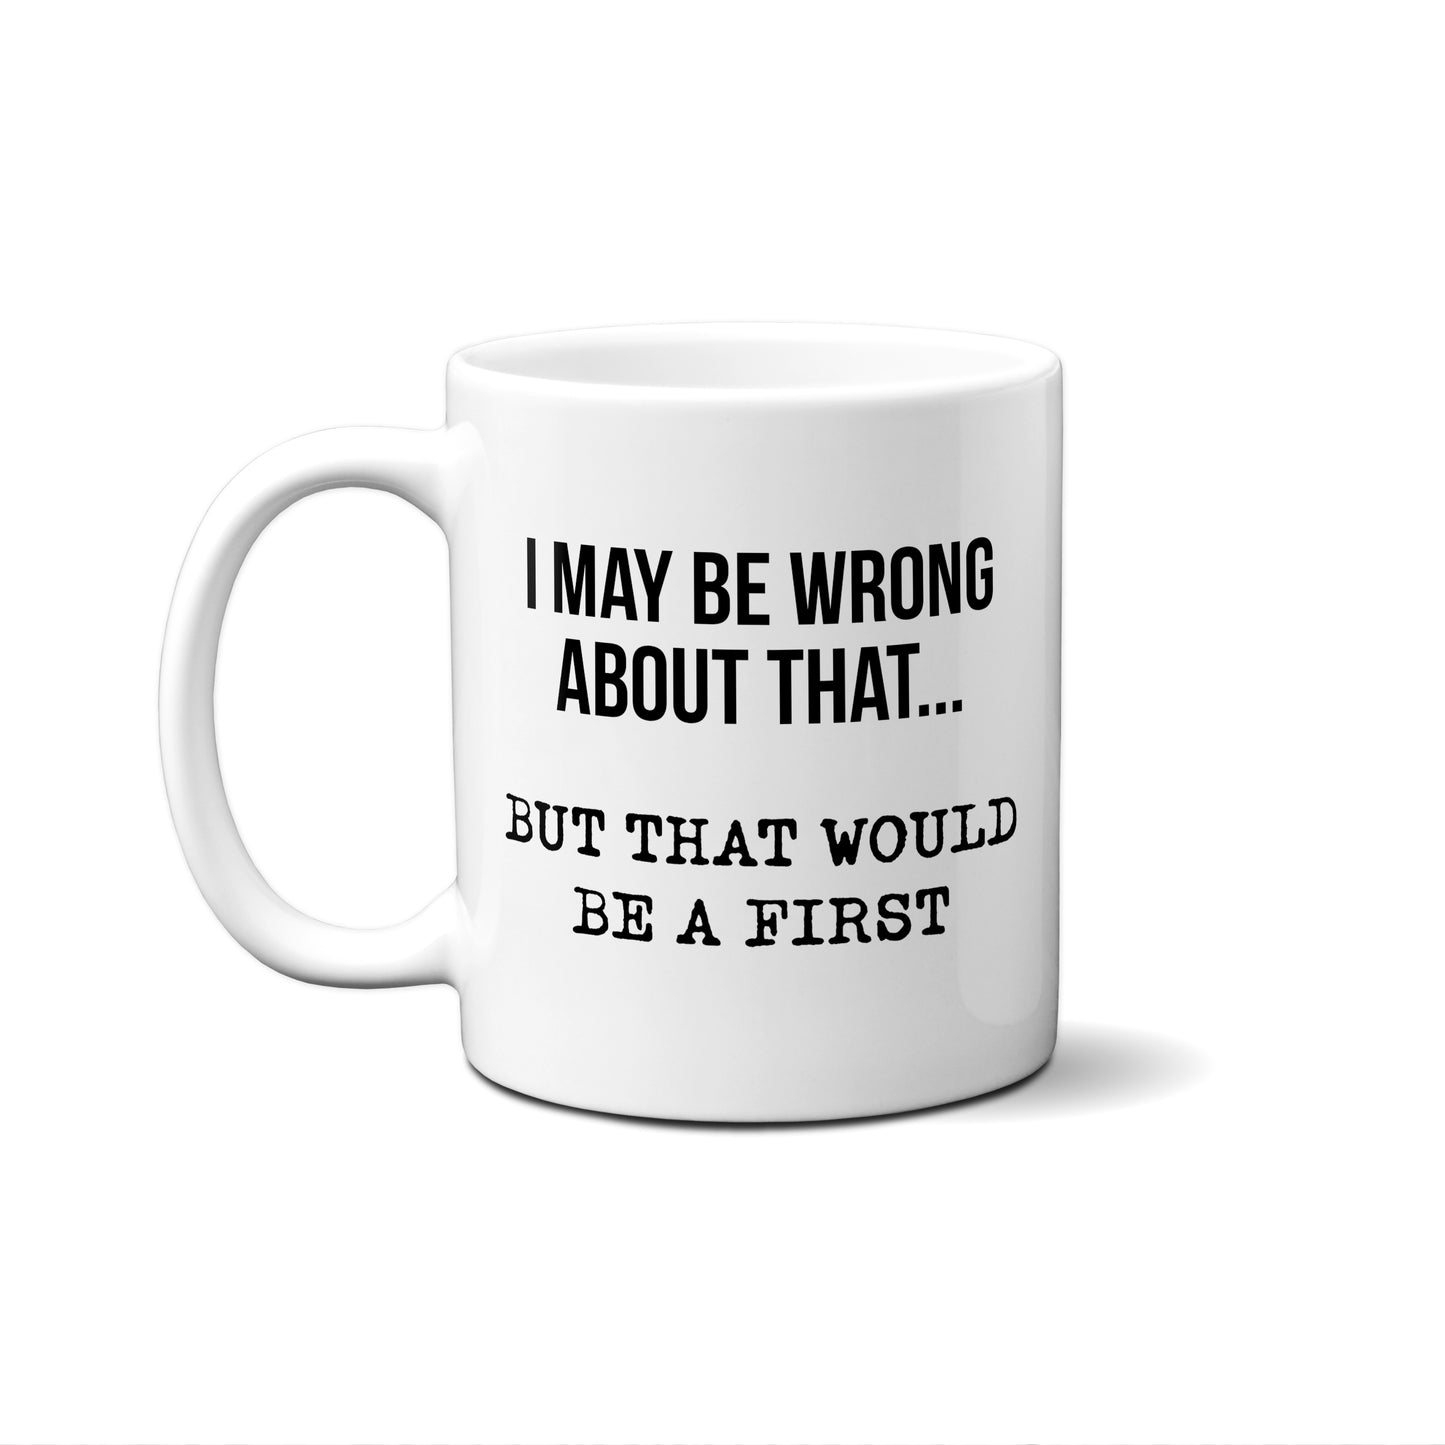 I May Be Wrong About That… But That Would Be A First. Quote Mug